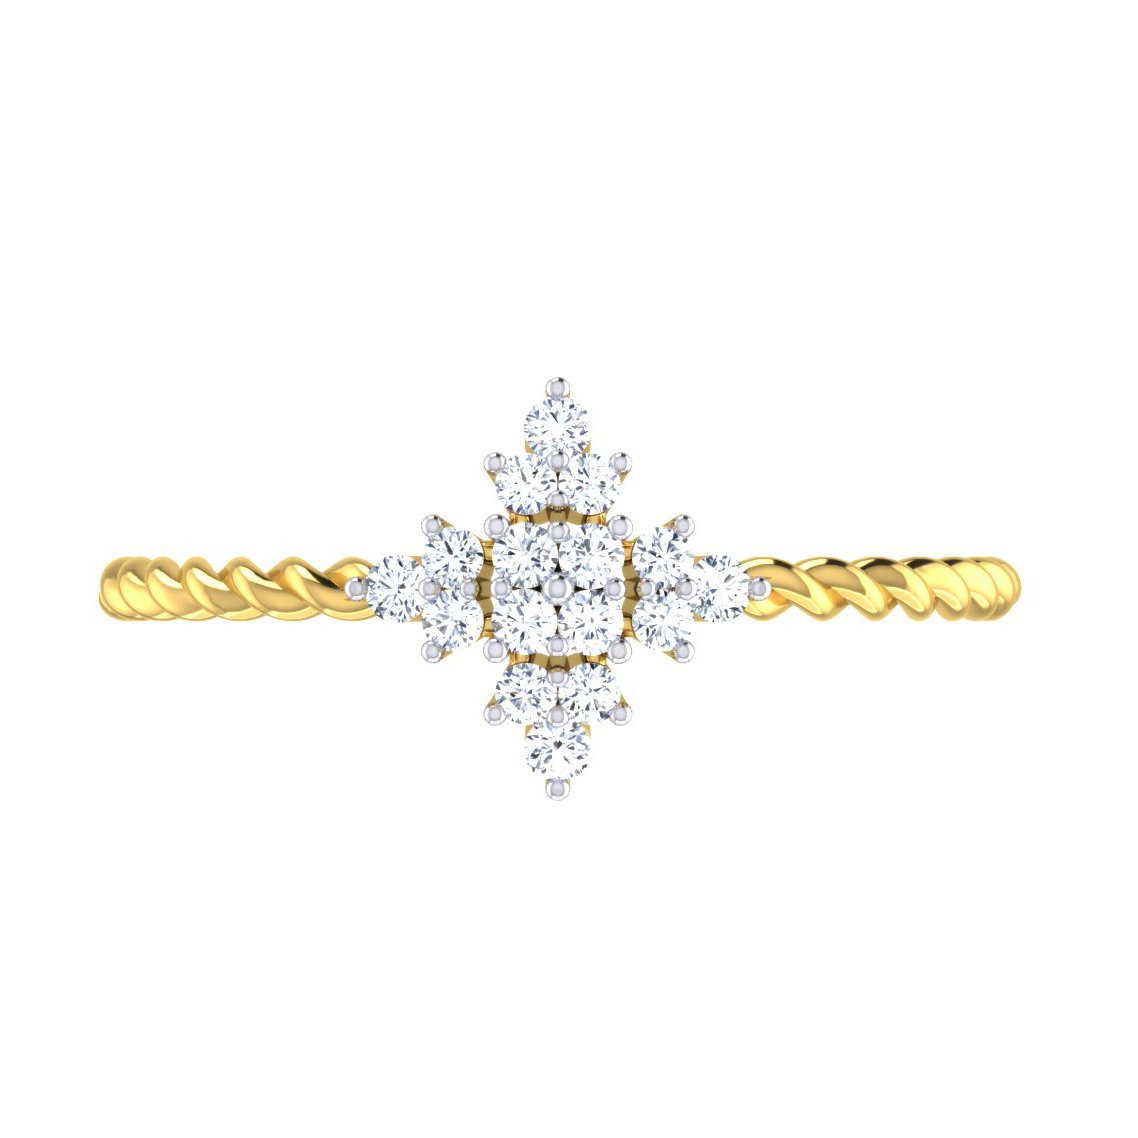 Chrisantha Diamond Ring In Pure Gold By Dhanji Jewels